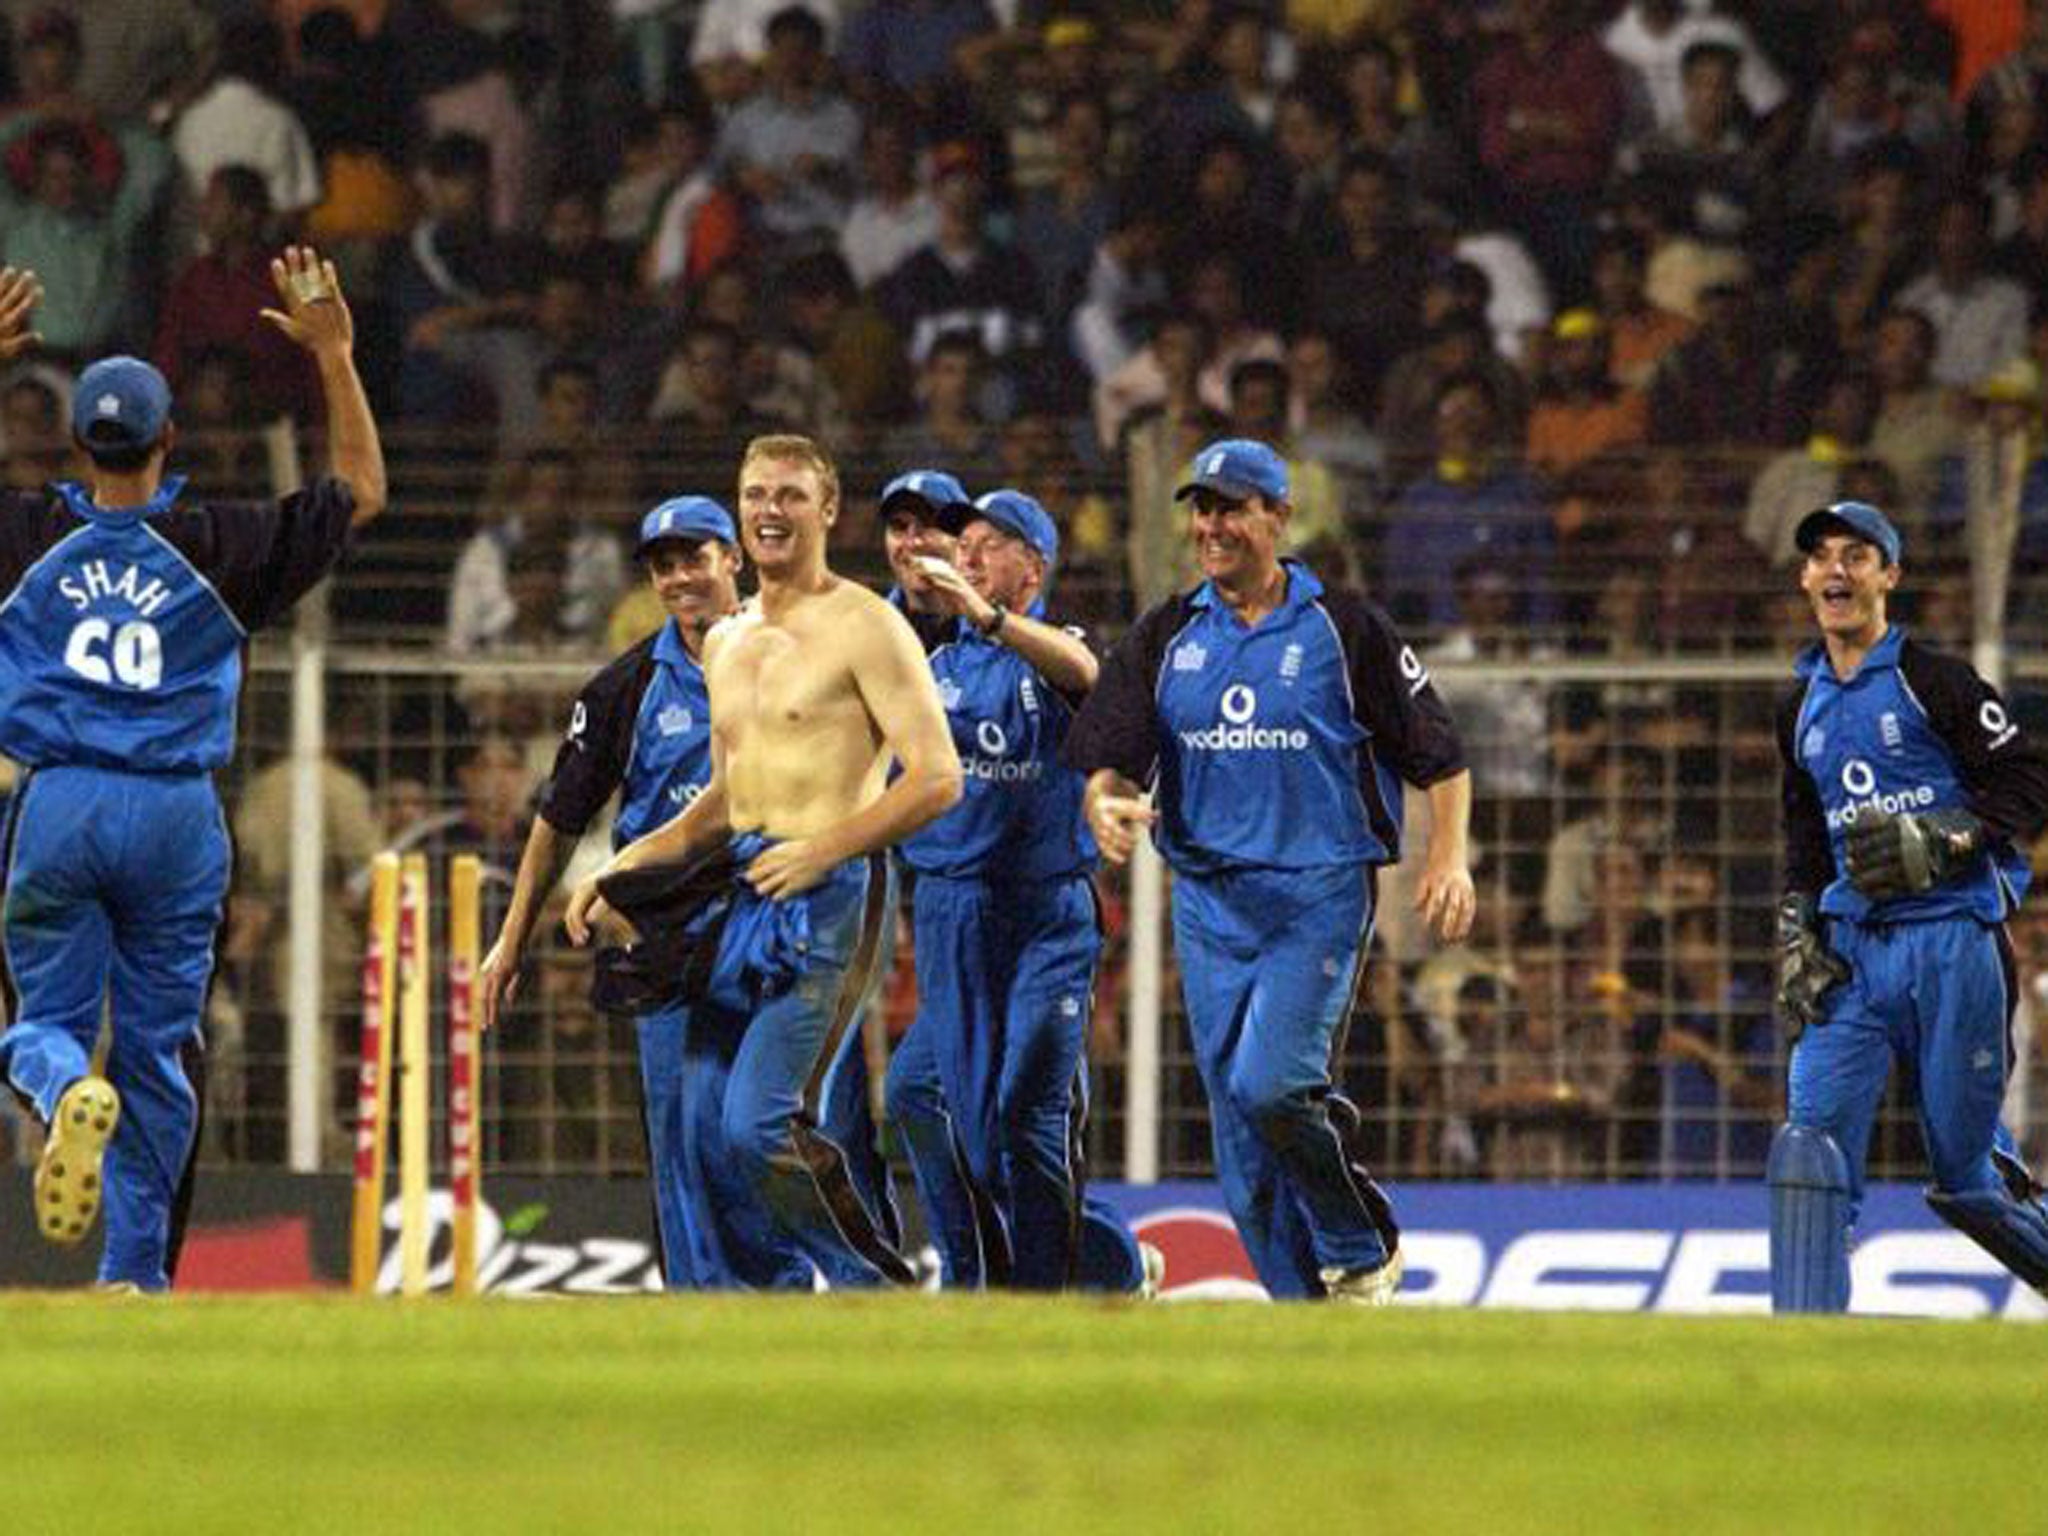 Andrew Flintoff celebrates with his shirt off in Mumbai in 2002